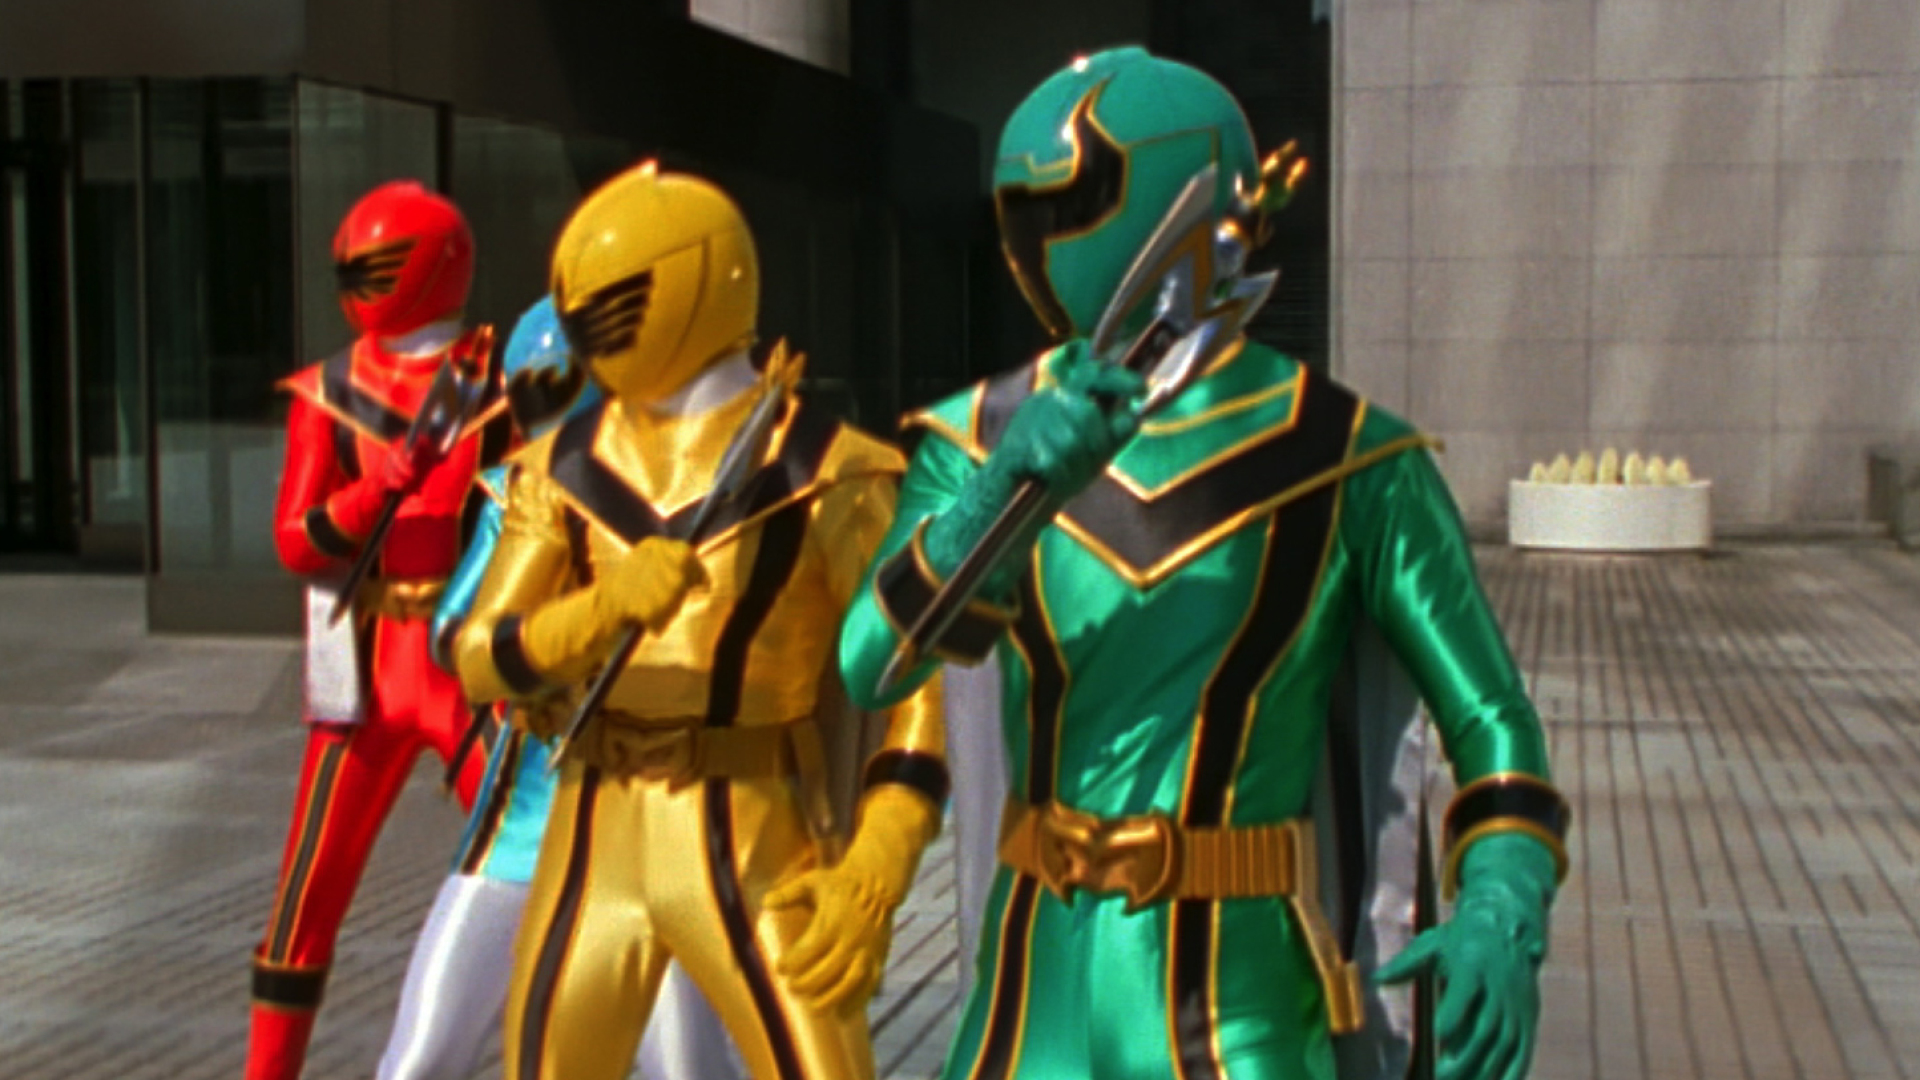 Power Rangers Mystic Force Wallpapers